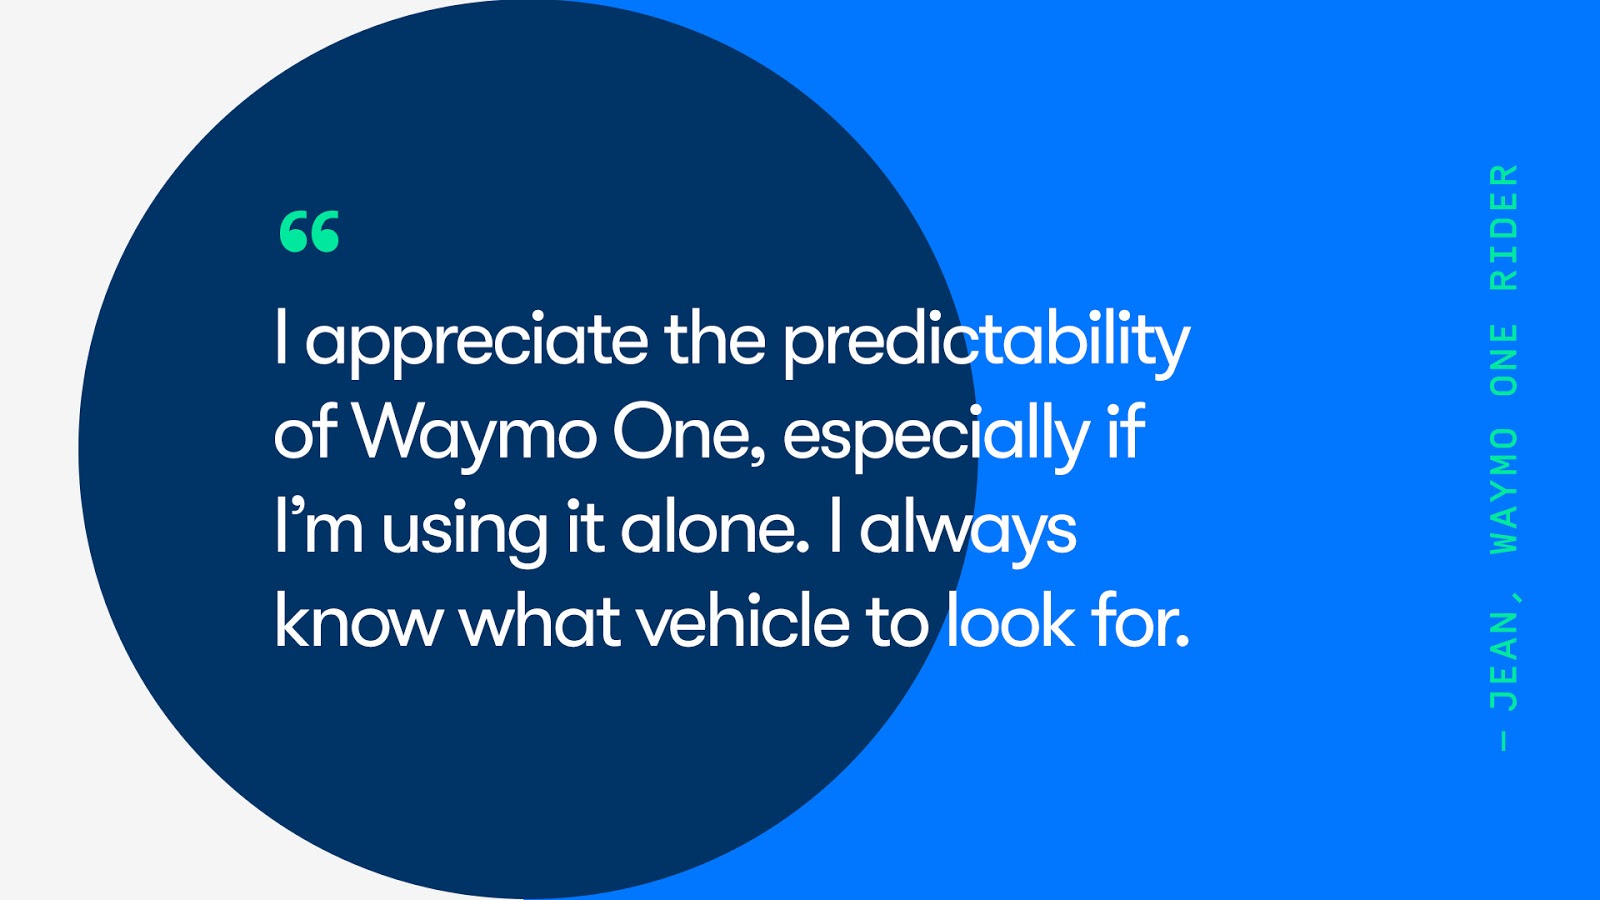 A quote from Waymo One rider, Jean. She says, "I appreciate the predictability of Waymo One, especially if I'm using it alone. I always know what vehicle to look for."